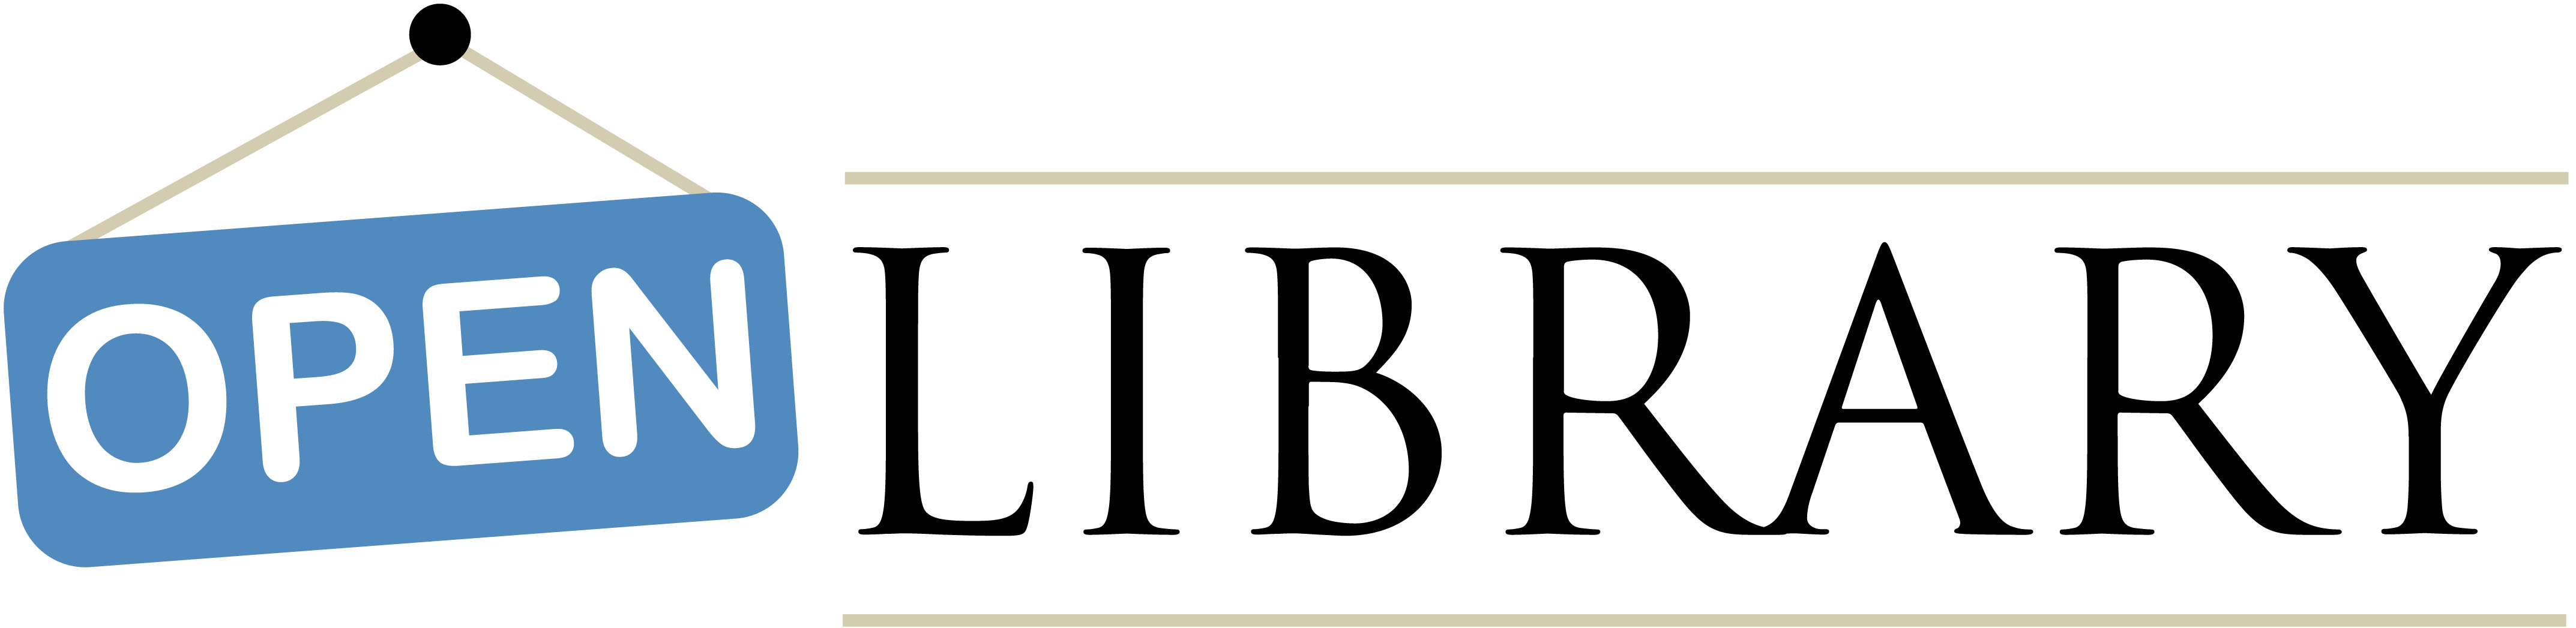 Image featuring the logo of openlibrary.org